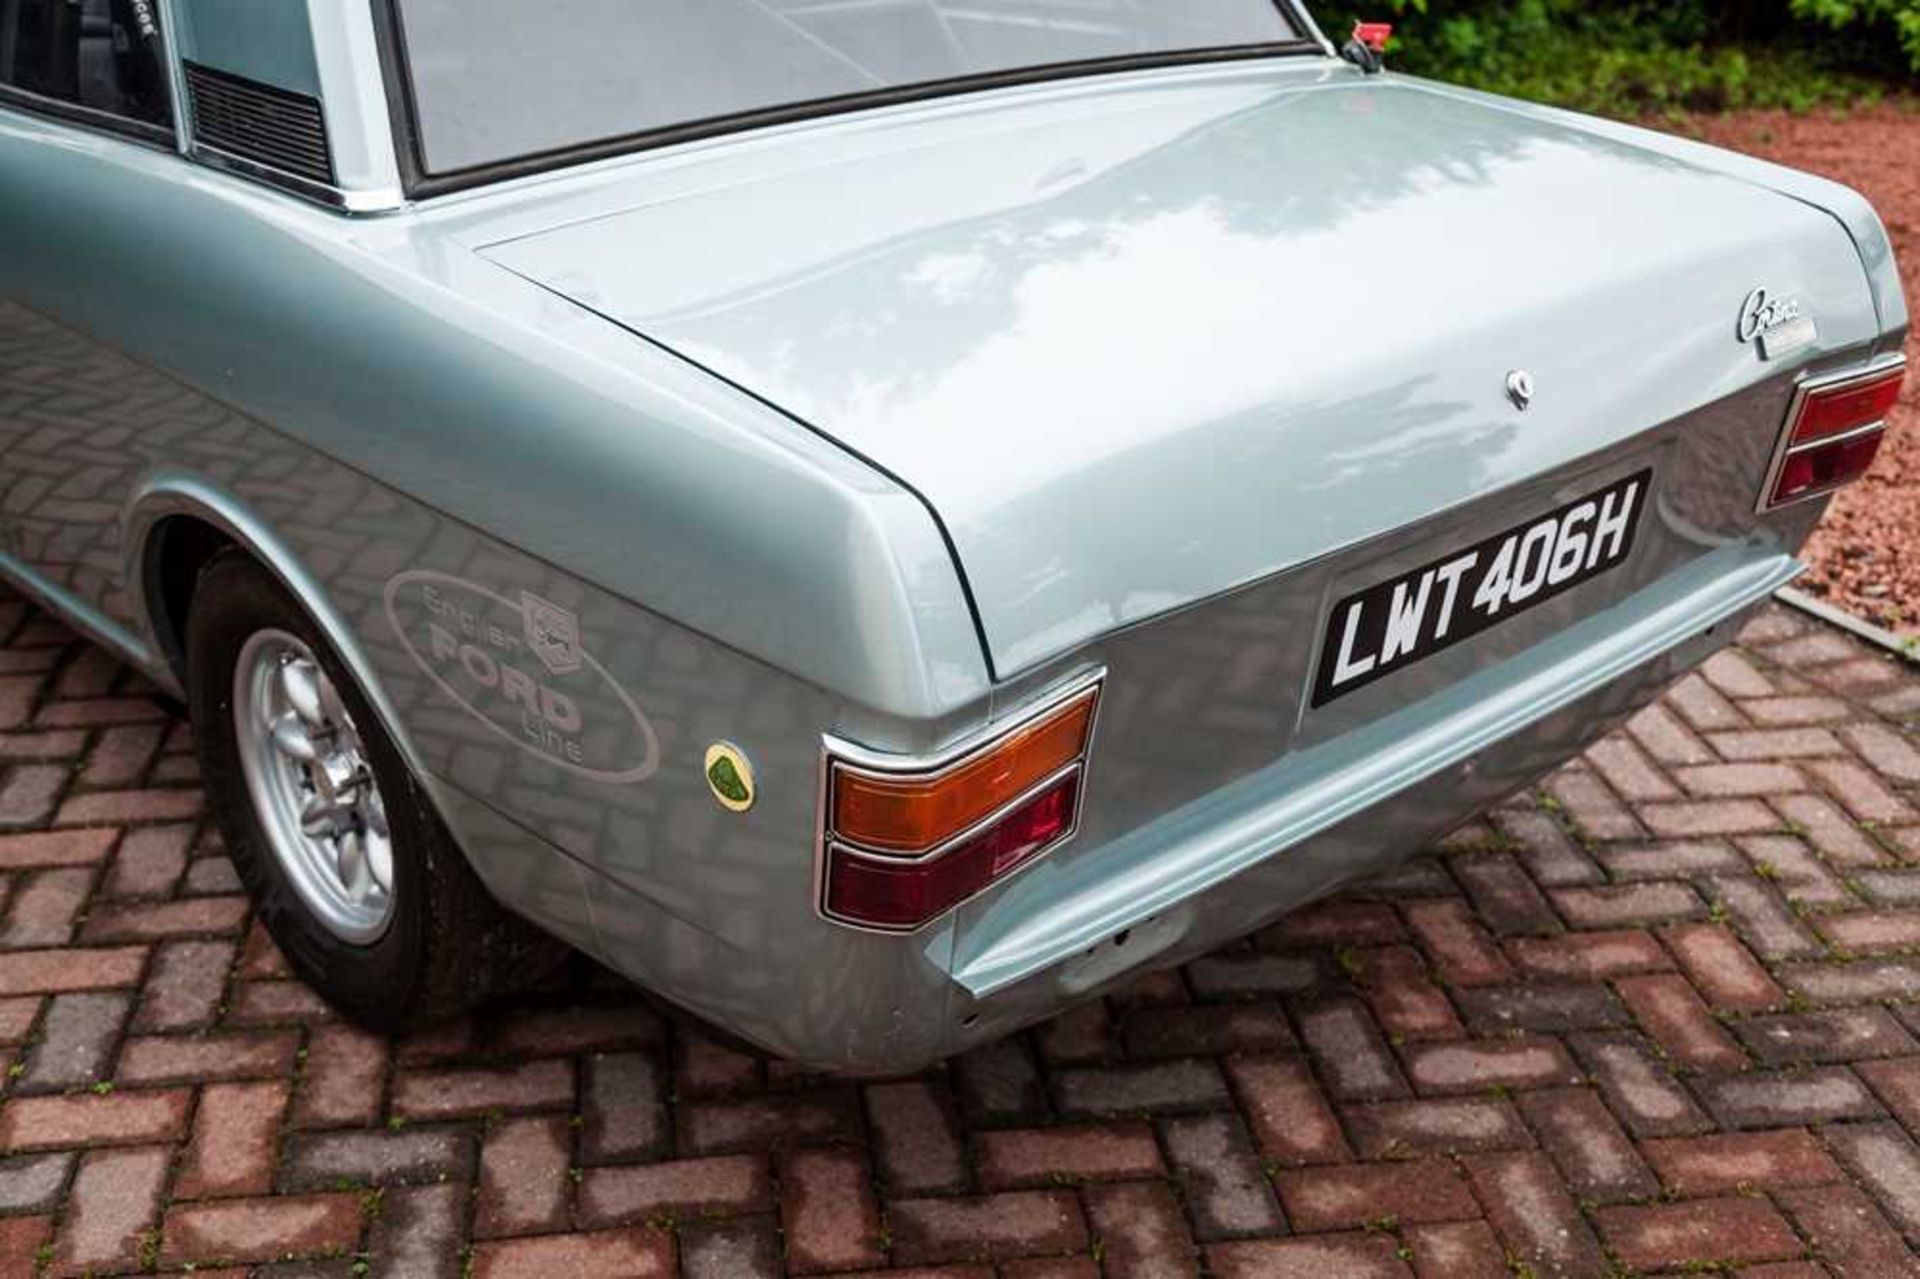 1969 Ford Cortina 'Lotus' Competition Saloon Powered by a 1598cc FIA-legal Lotus Twin-Cam with Twin - Image 28 of 55